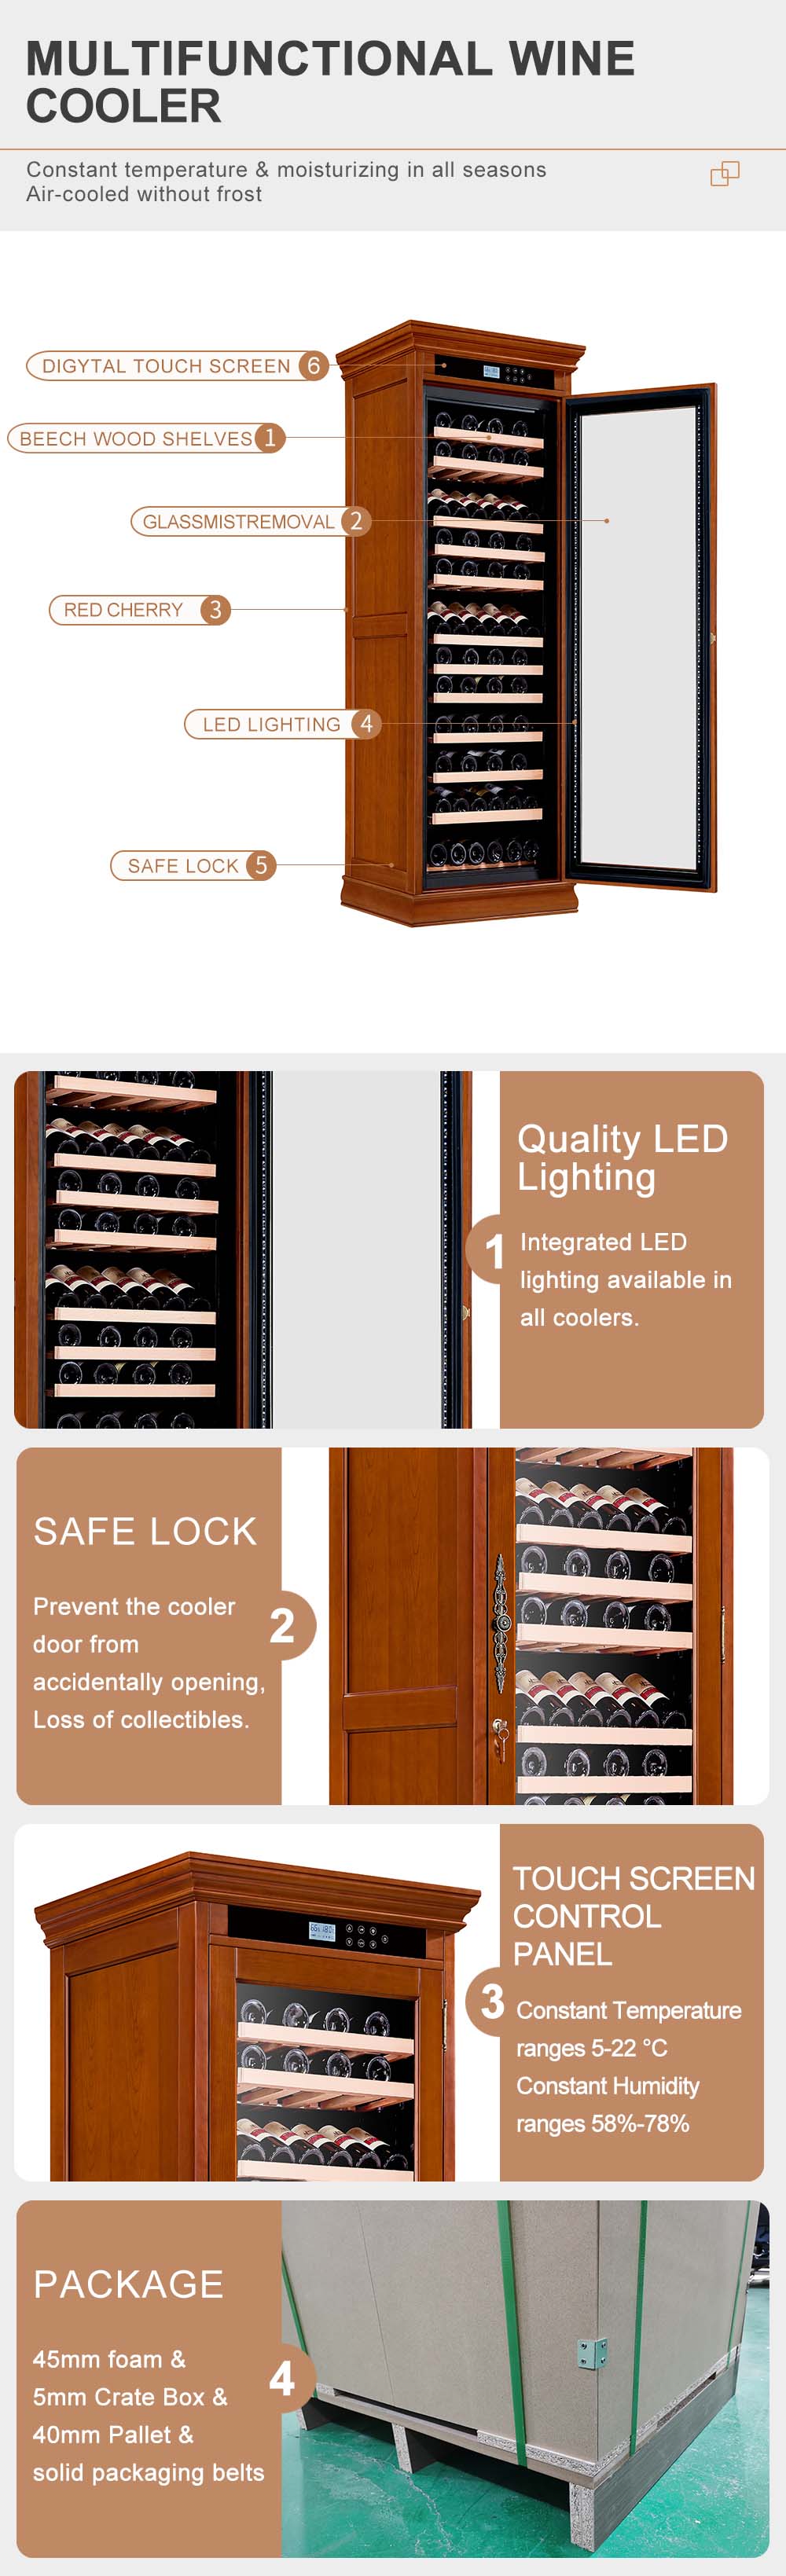 wood thermostatic wine cooler (1)